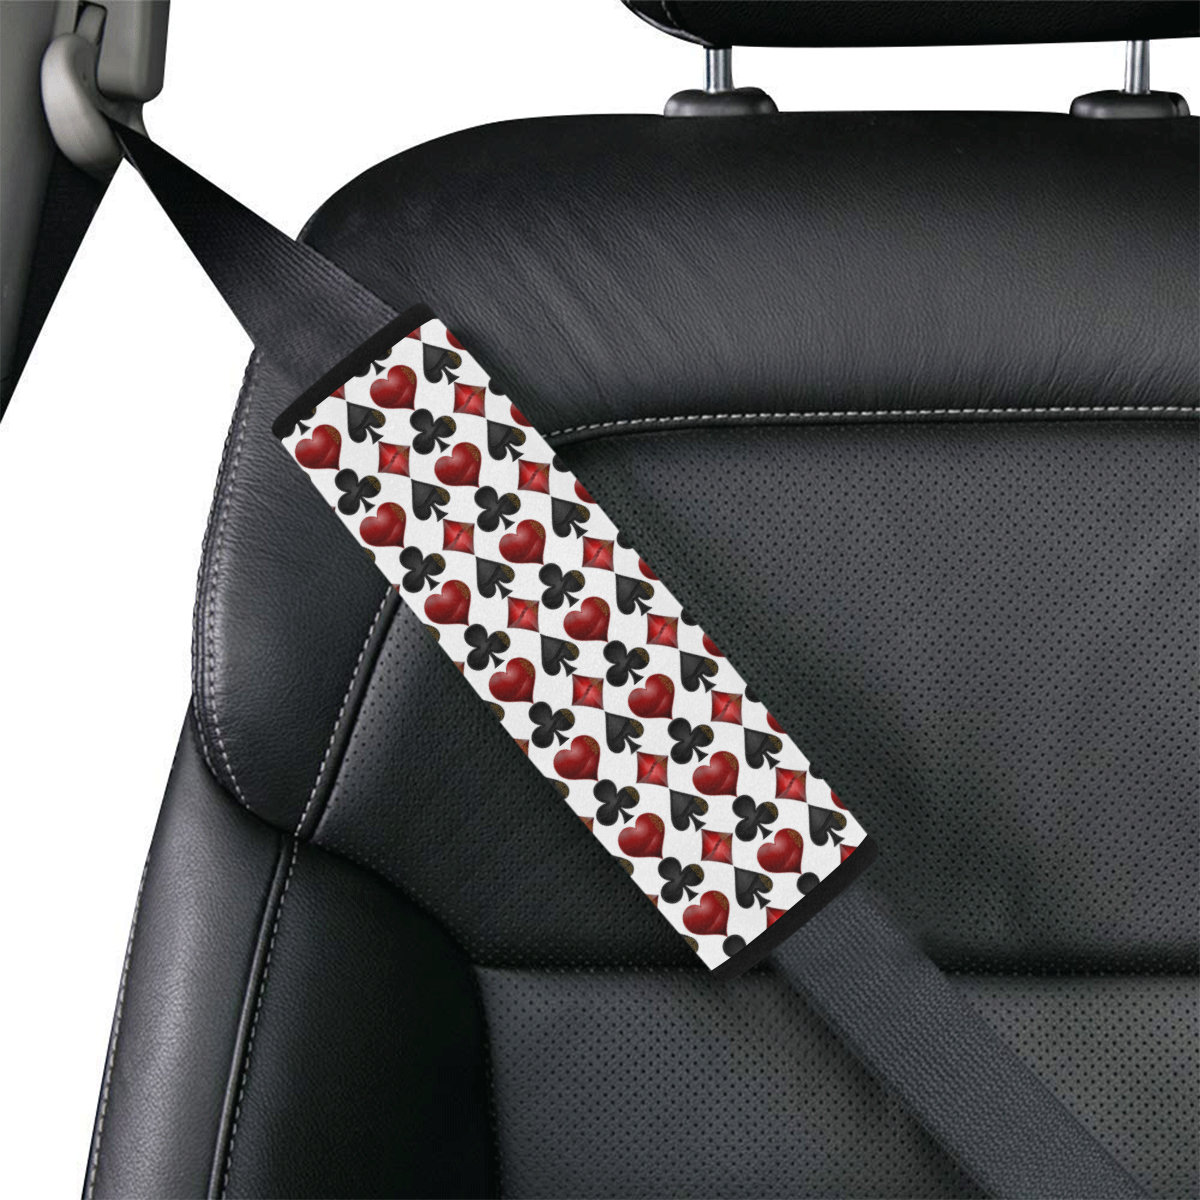 Las Vegas Black and Red Casino Poker Card Shapes on White Car Seat Belt Cover 7''x8.5''